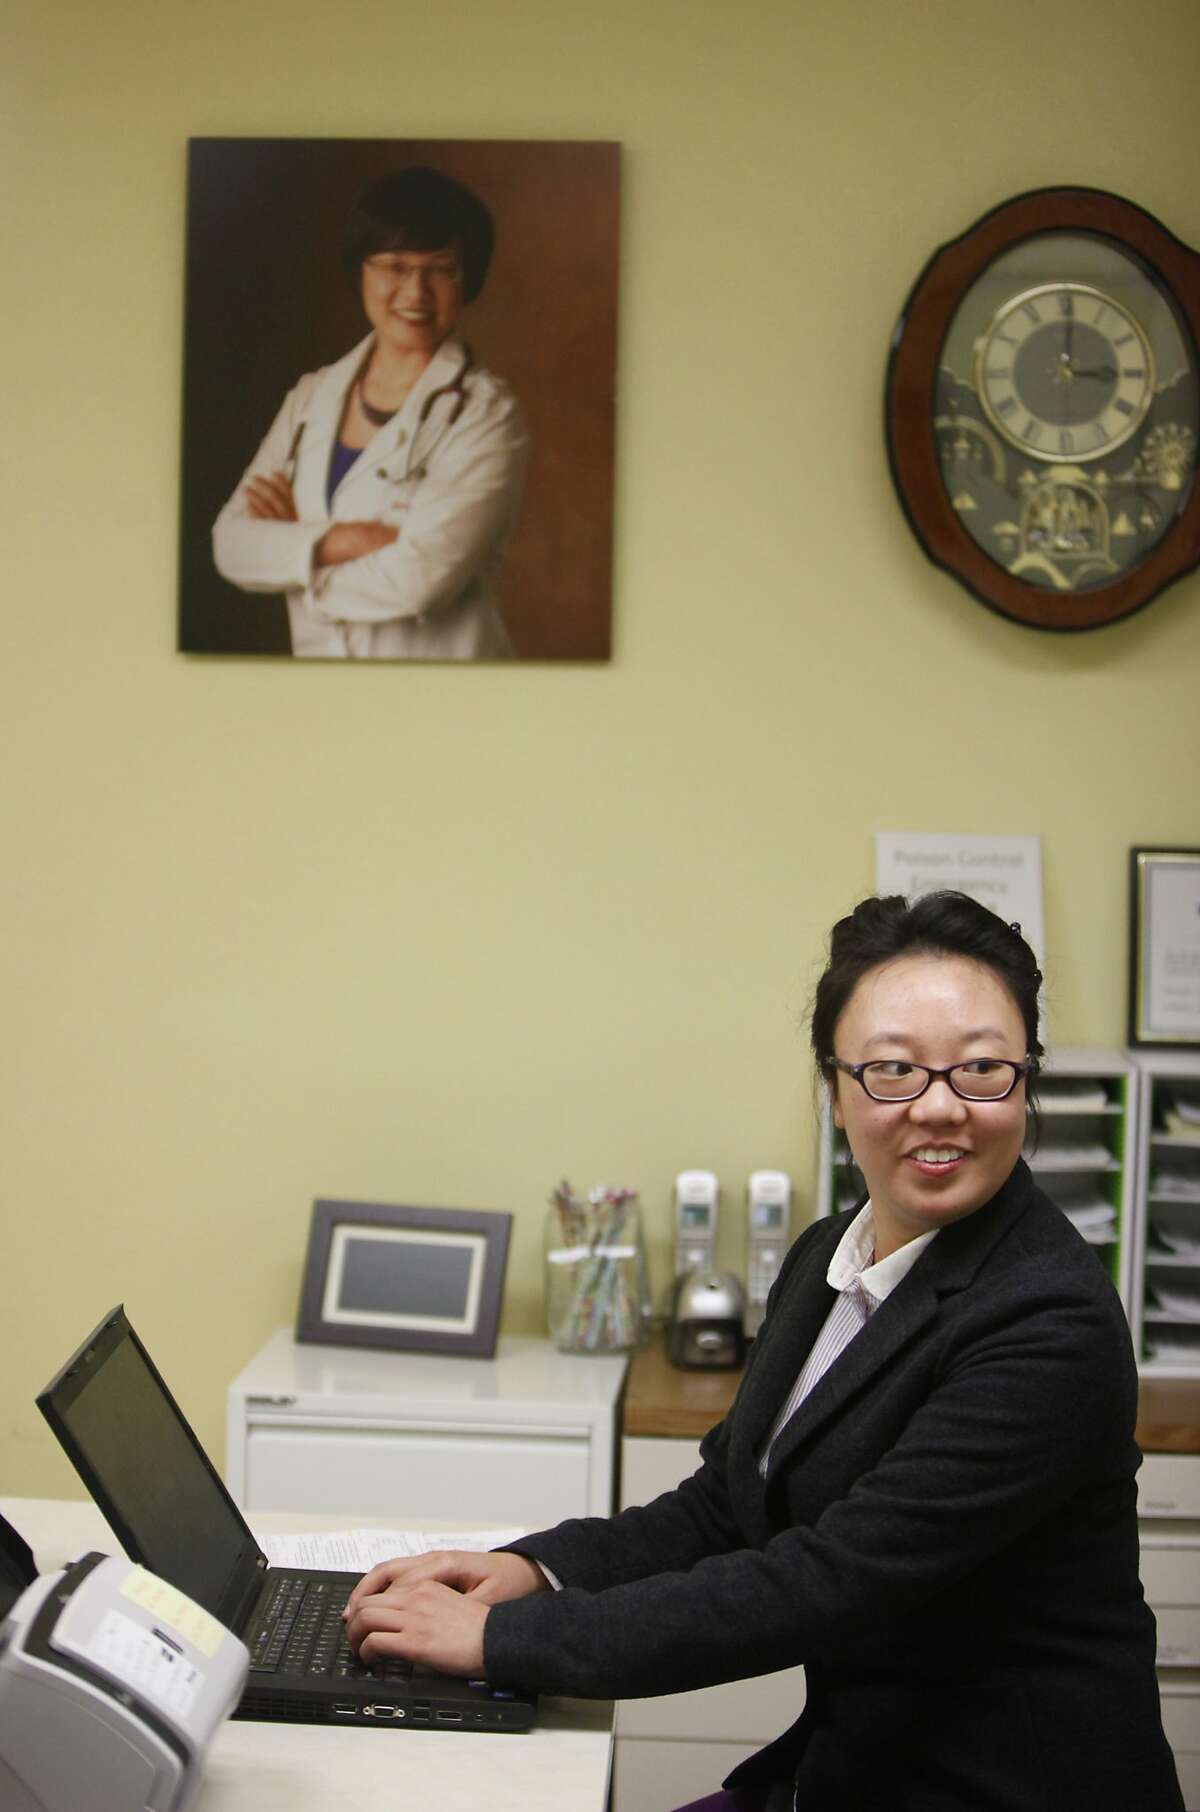 City College of San Francisco student Wendy Liu works on a computer at Sound Pediatrics where she works as a administrative assistant at her mother's practice on Tuesday, February 18, 2014 in Daly City, Calif.